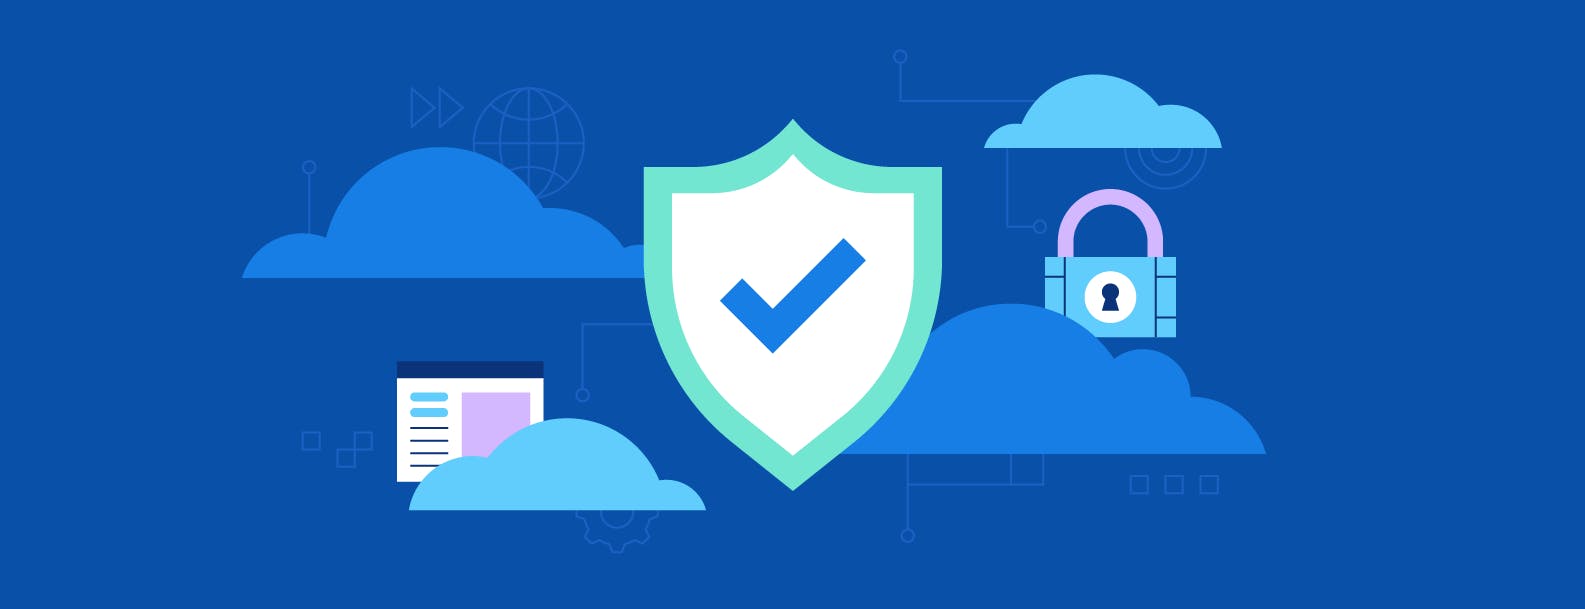 Dark blue background with icons depicting cloud compliance including a shield with a checkmark, clouds, lock, and a computer screen. 